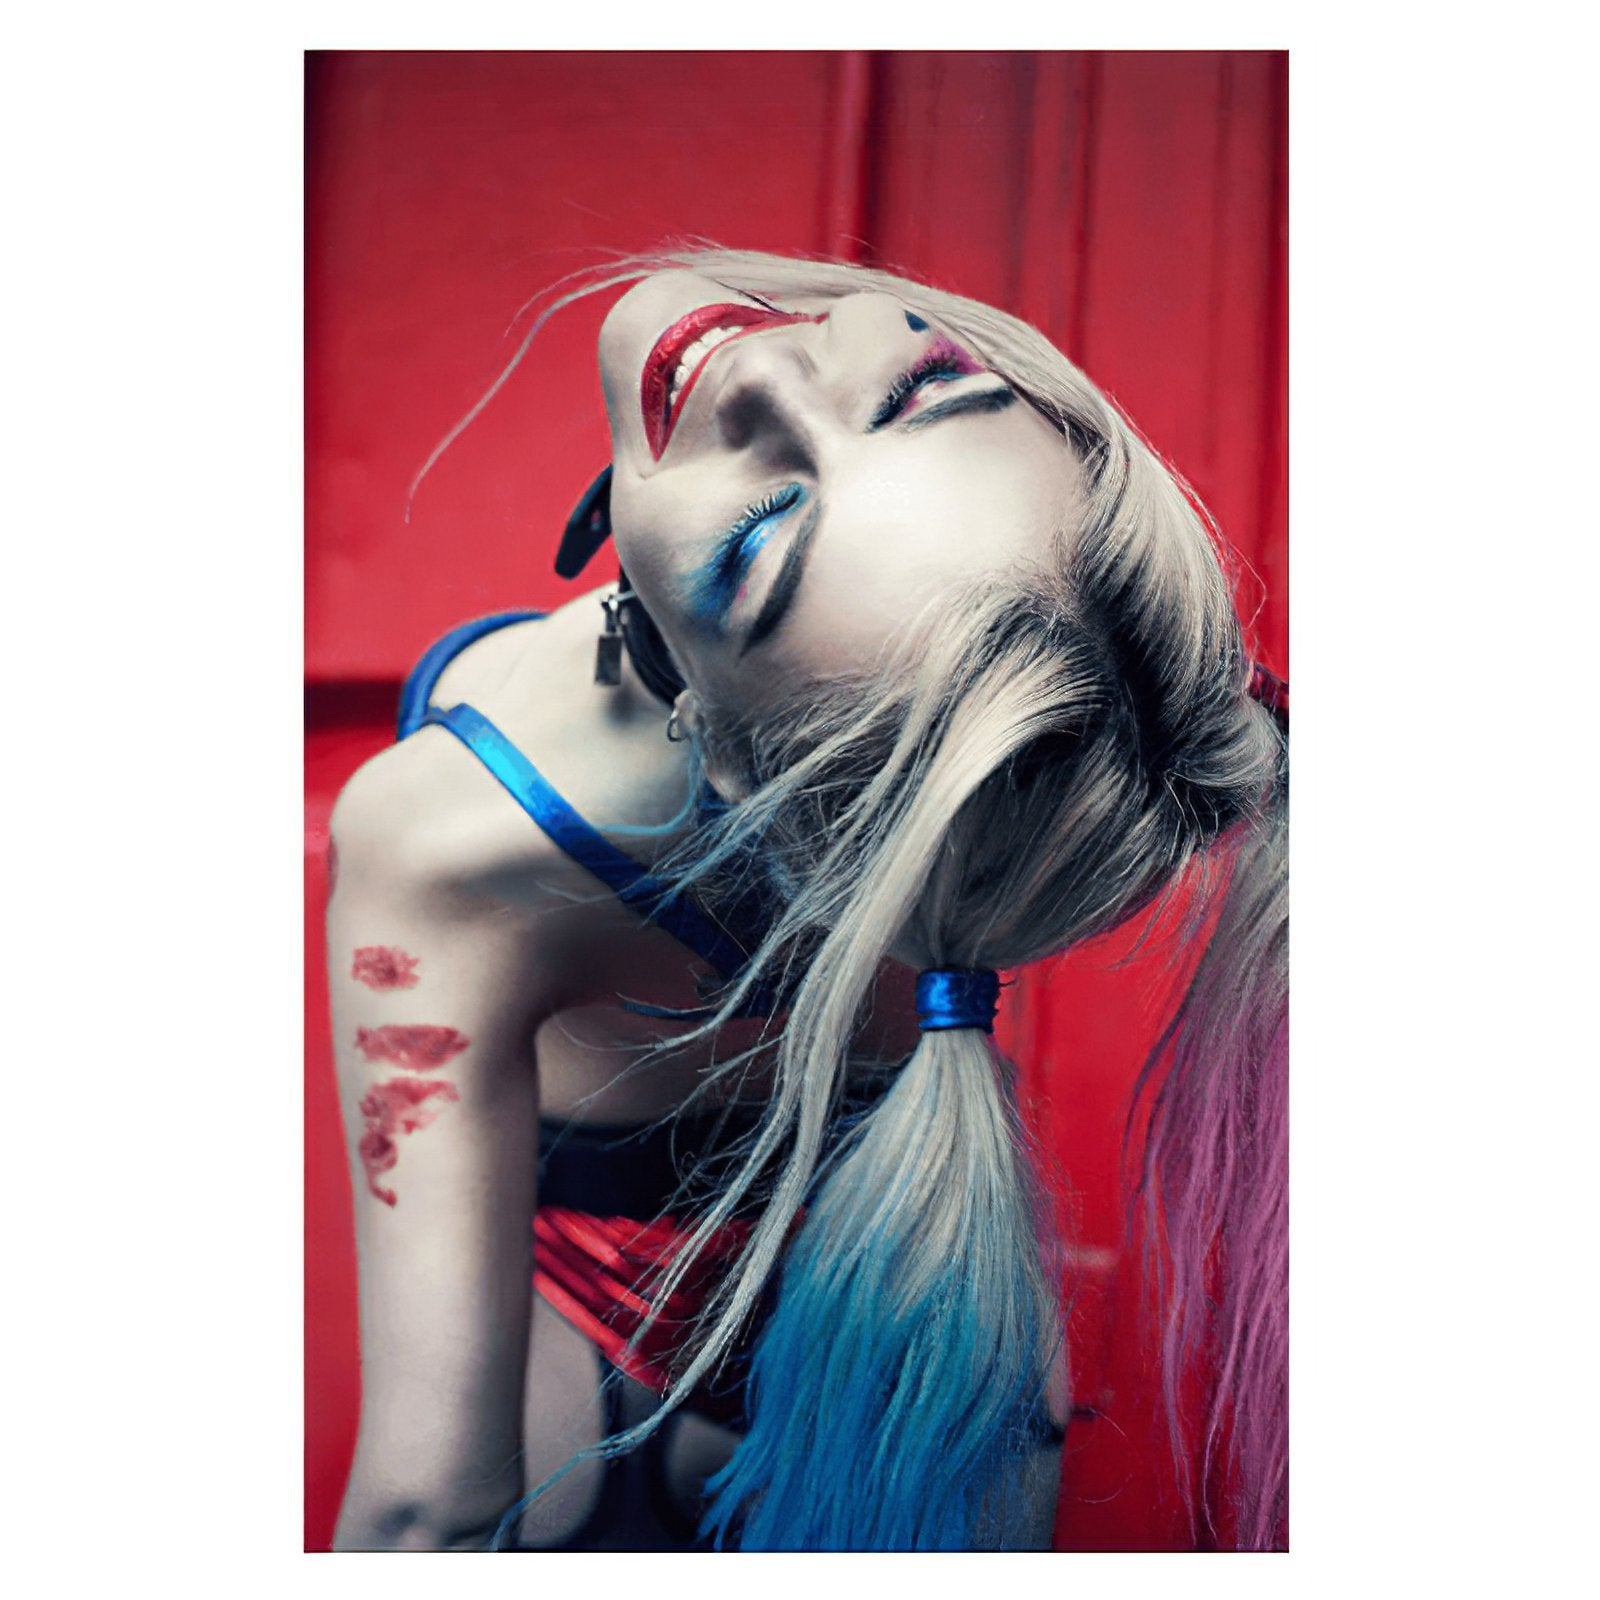 Embrace the madness with Harley Quinn from Suicide Squad.Harley Quinn Suicide Squad - Diamondartlove